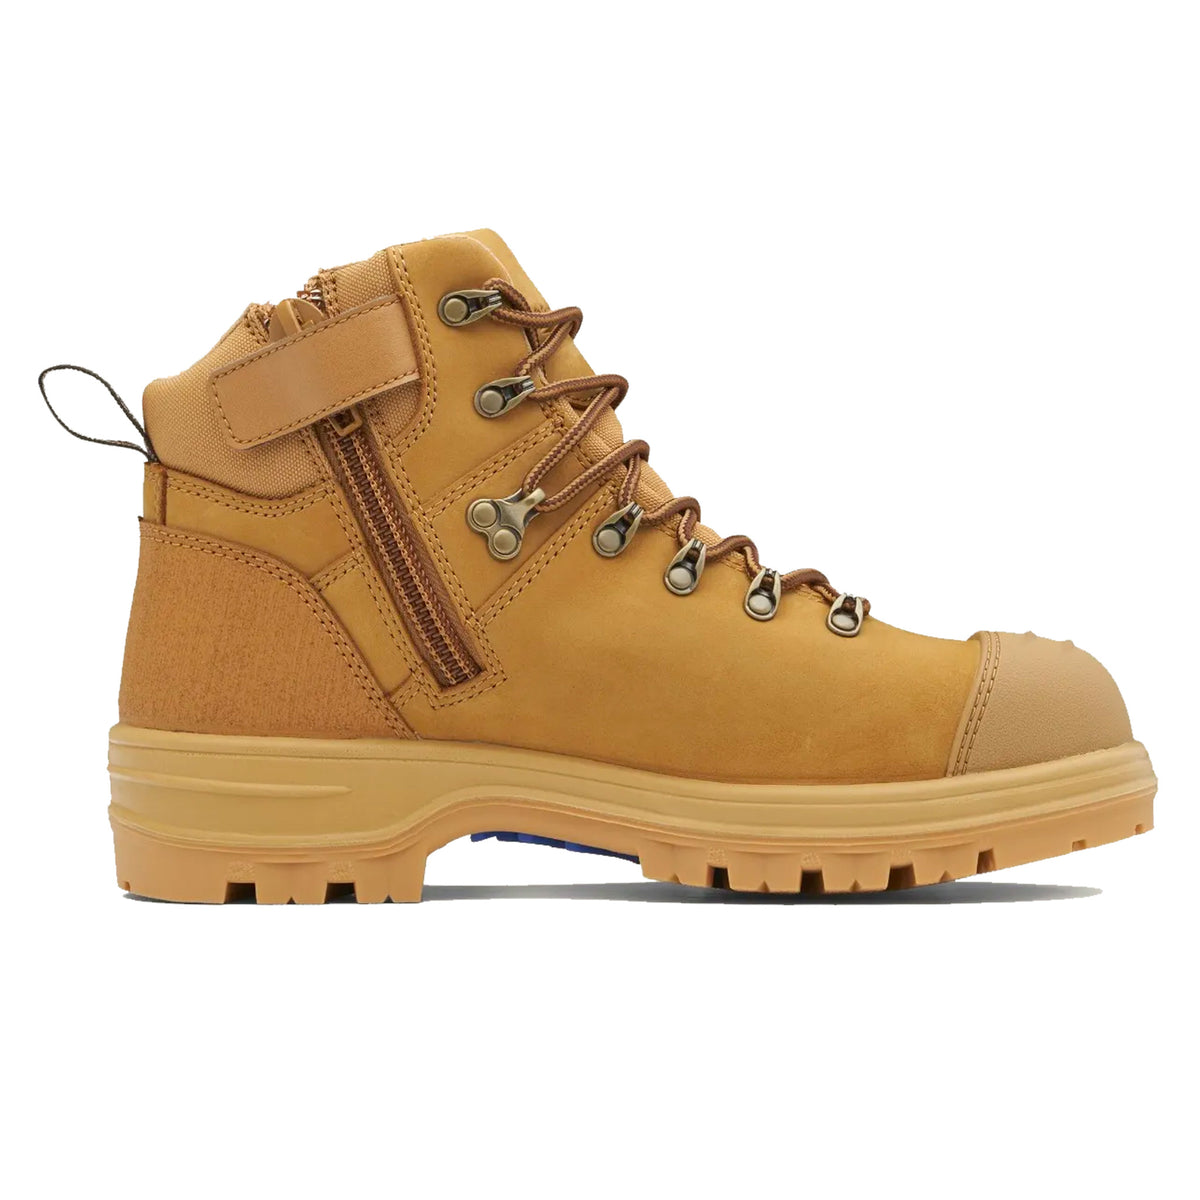 blundstone style 243 ankle zip side boot in wheat 